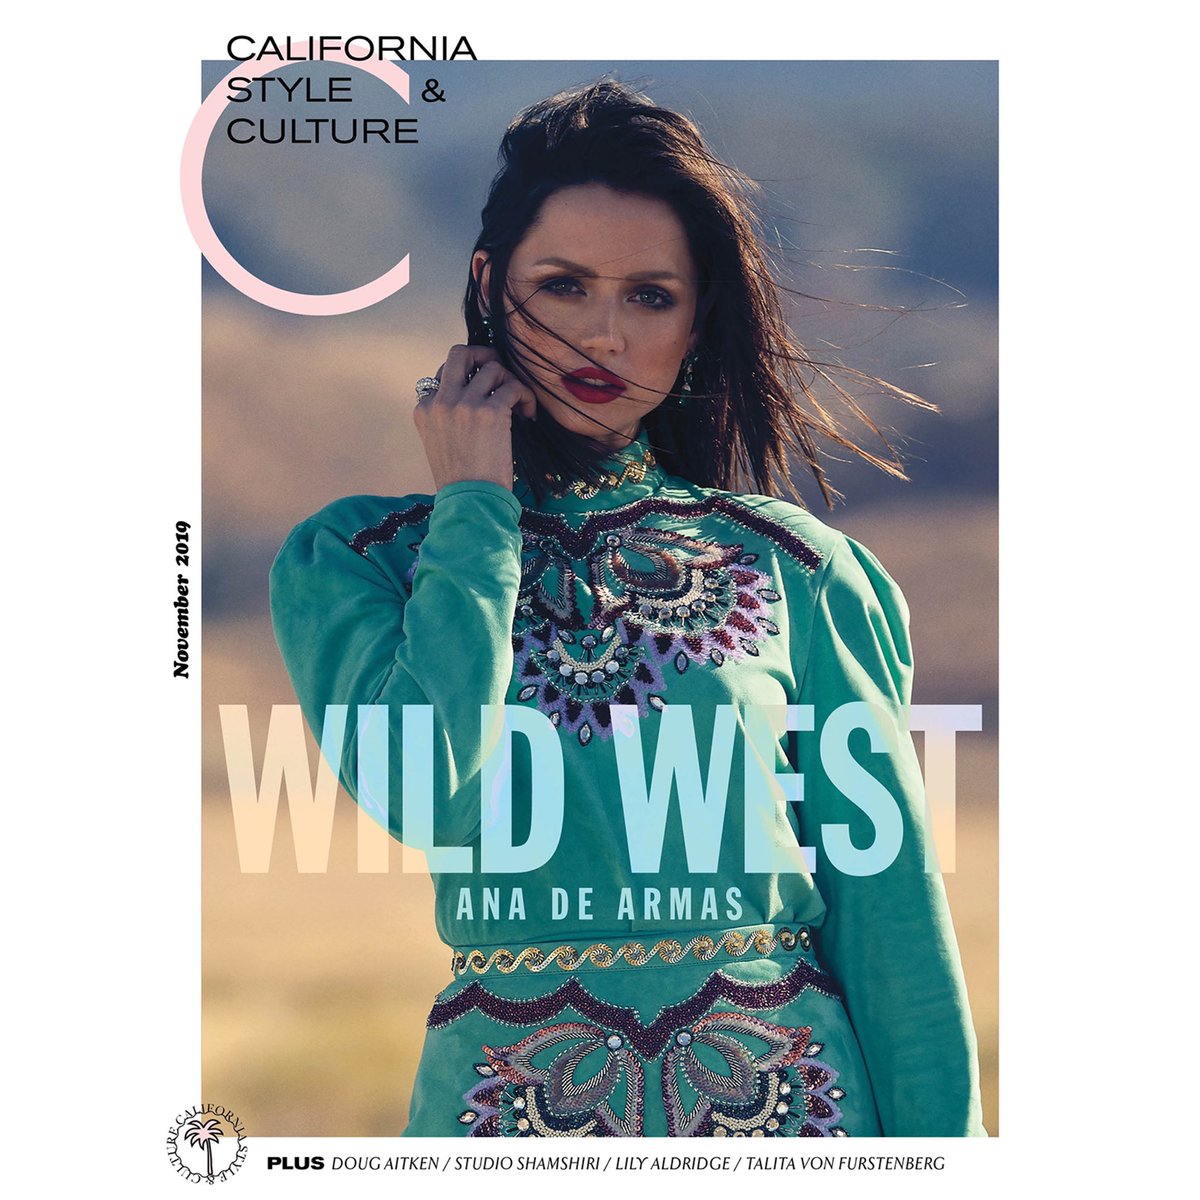 Ana De Armas took a leap of faith & let us take her to some locations I’ve been wanting to shoot for a long time. Thank you to Ana, her team, and everyone at @ccalistyle! instagram.com/p/B4AYXJxleld/…